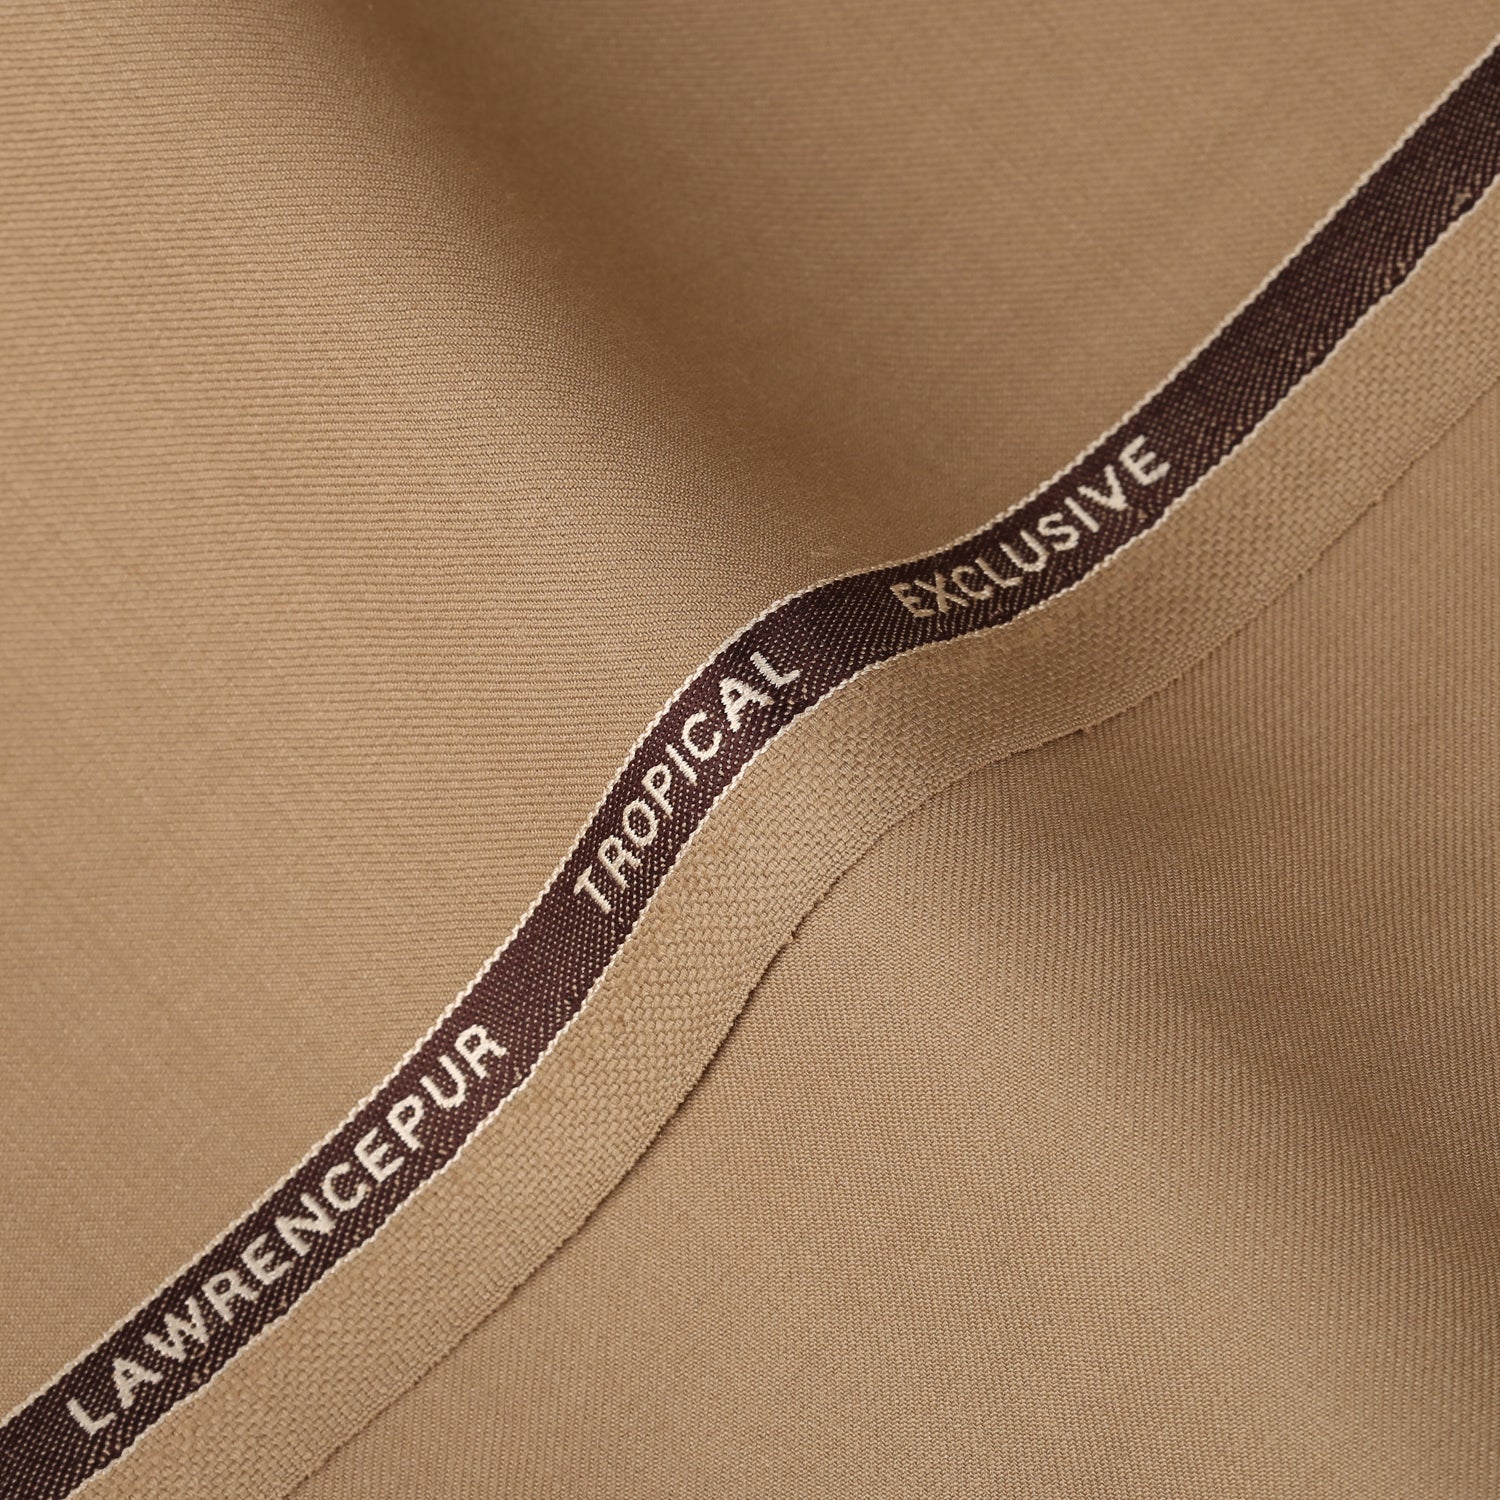 Plain Light Brown, Wool Blend, Tropical Exclusive Suiting Fabric